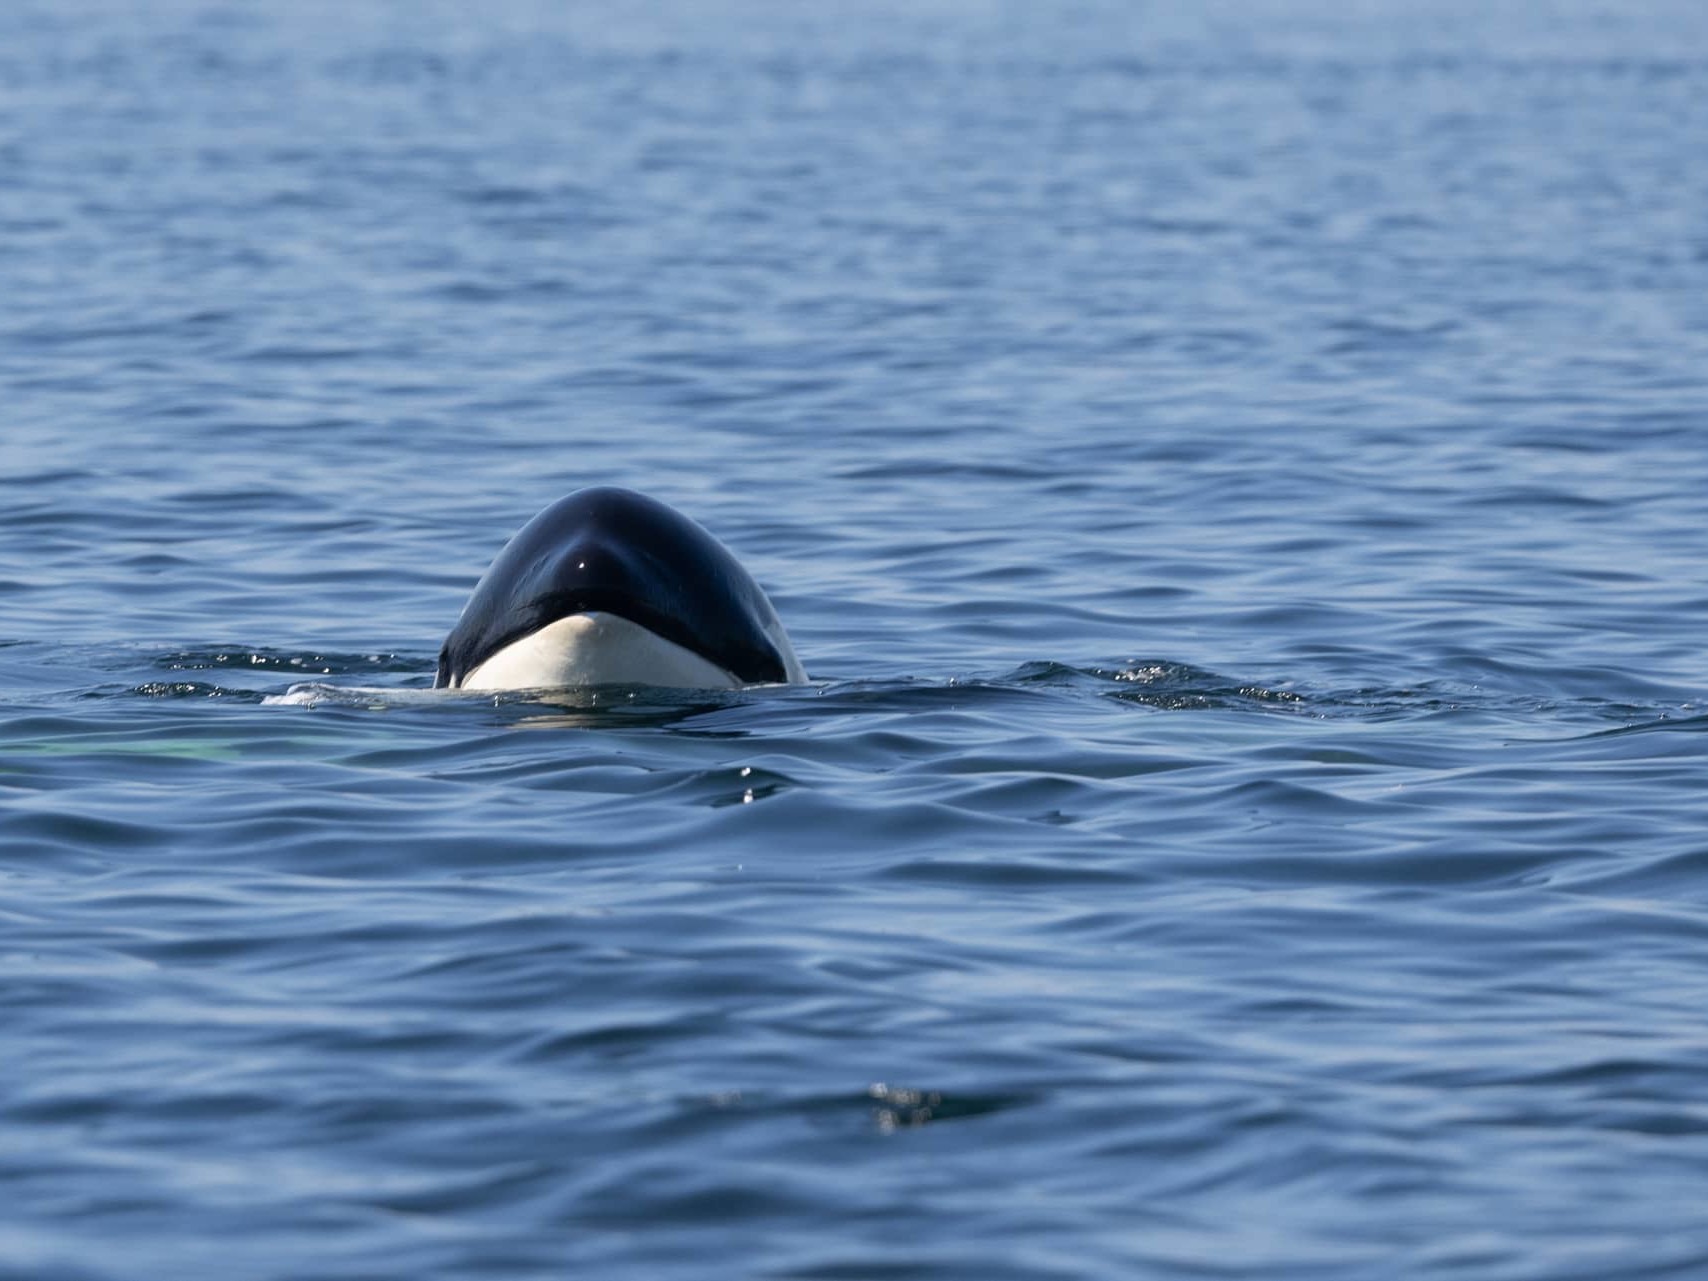 A Southern Resident killer whale peeking above the surface.